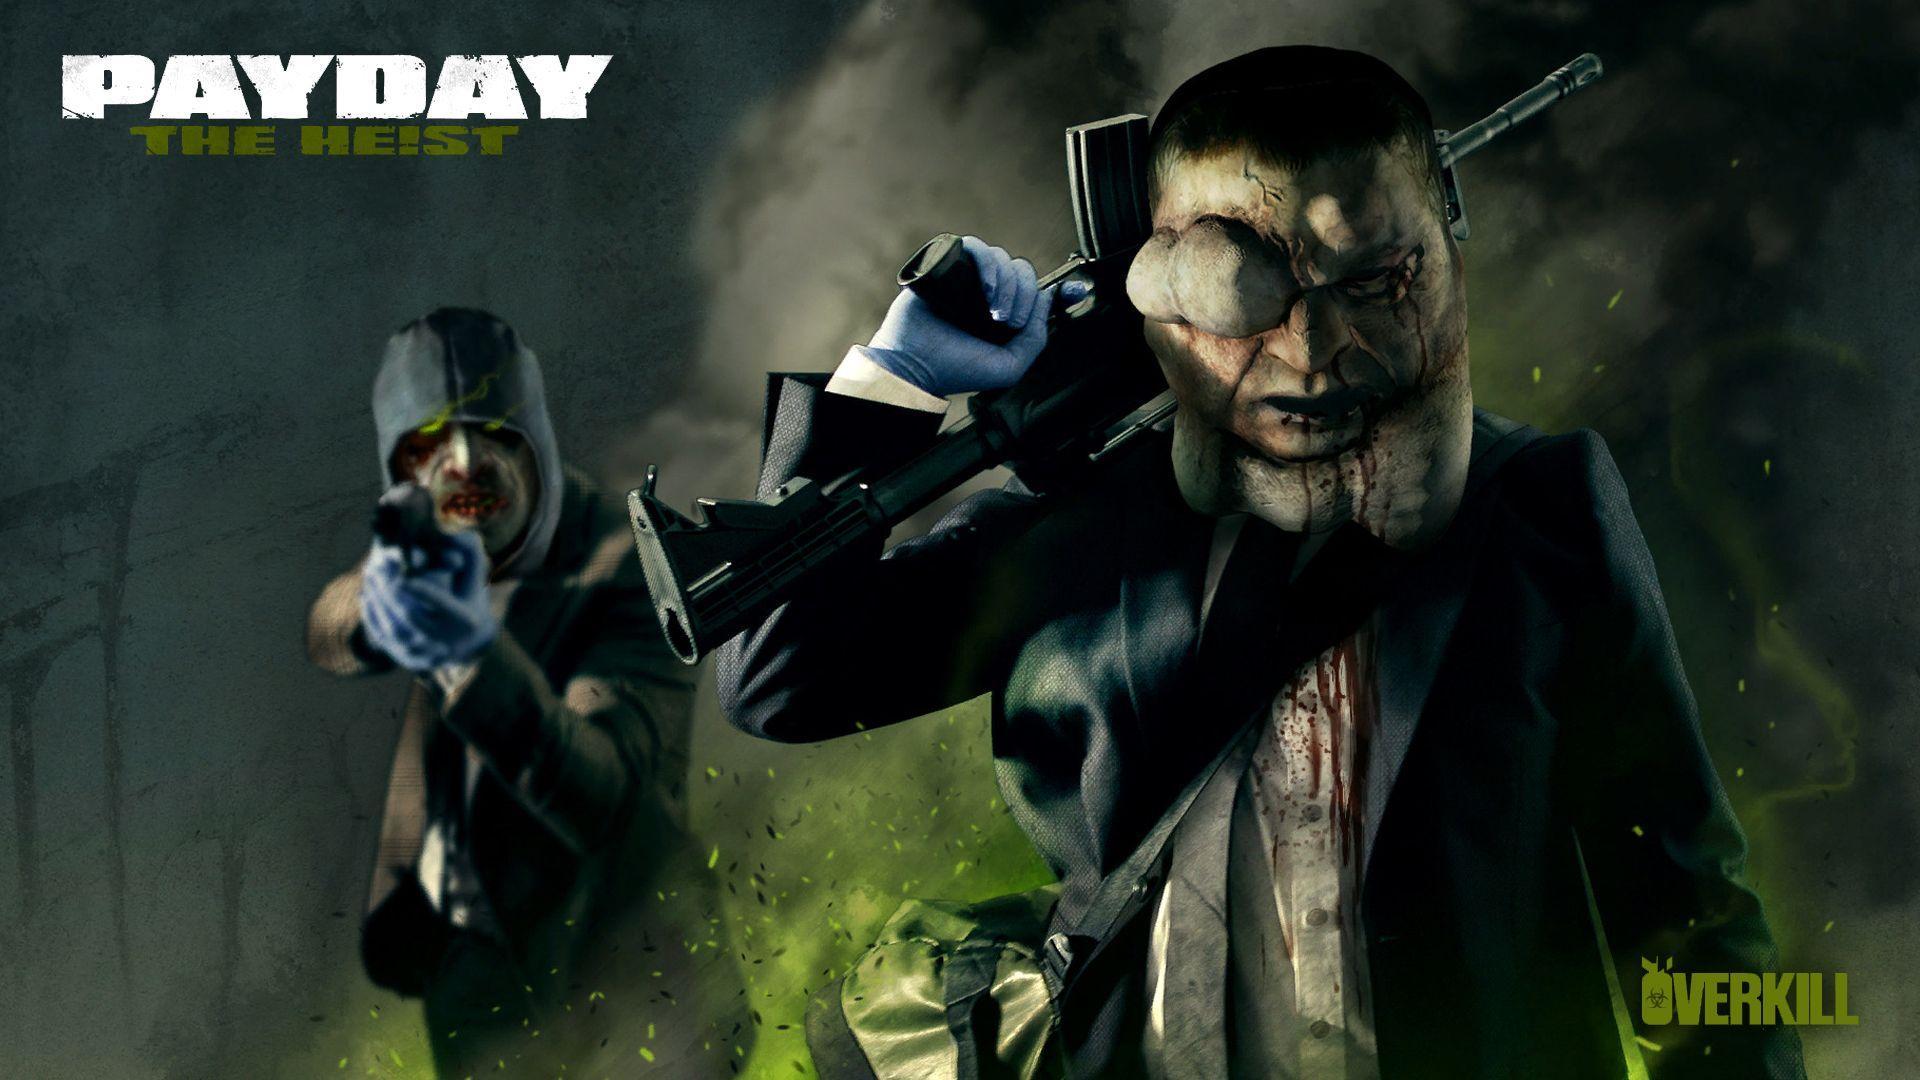 PAYDAY: The Heist ZOMBIE WP and Hoxton